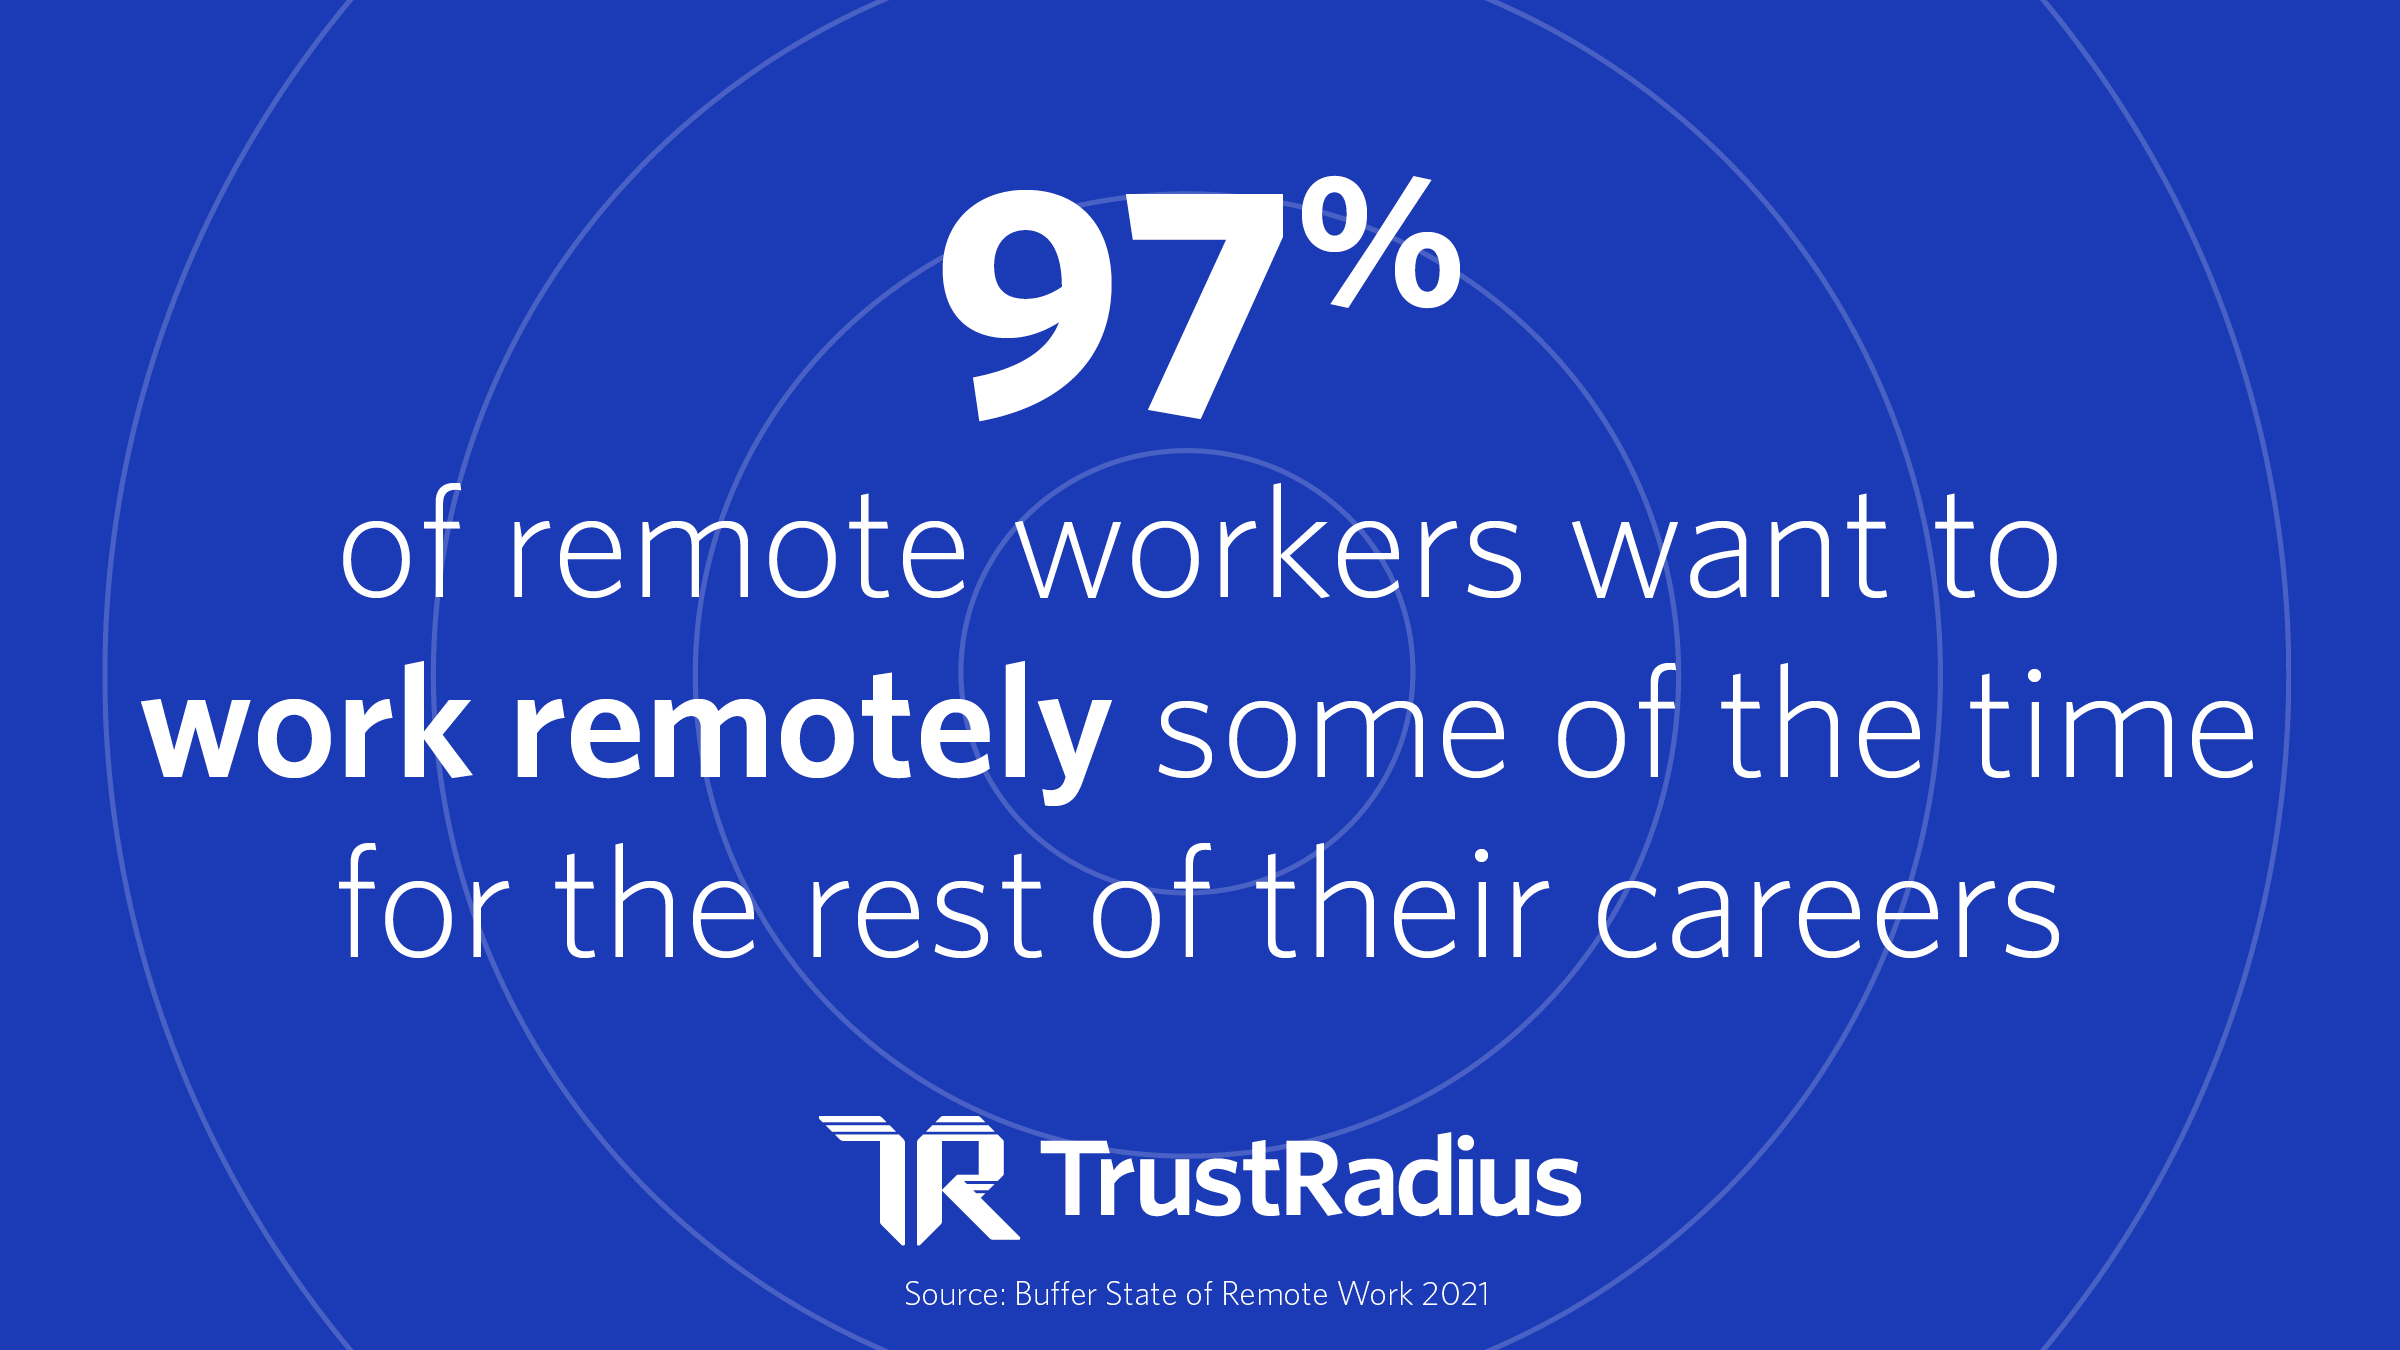 97% of remote workers want to work remotely some time for the rest of their careers